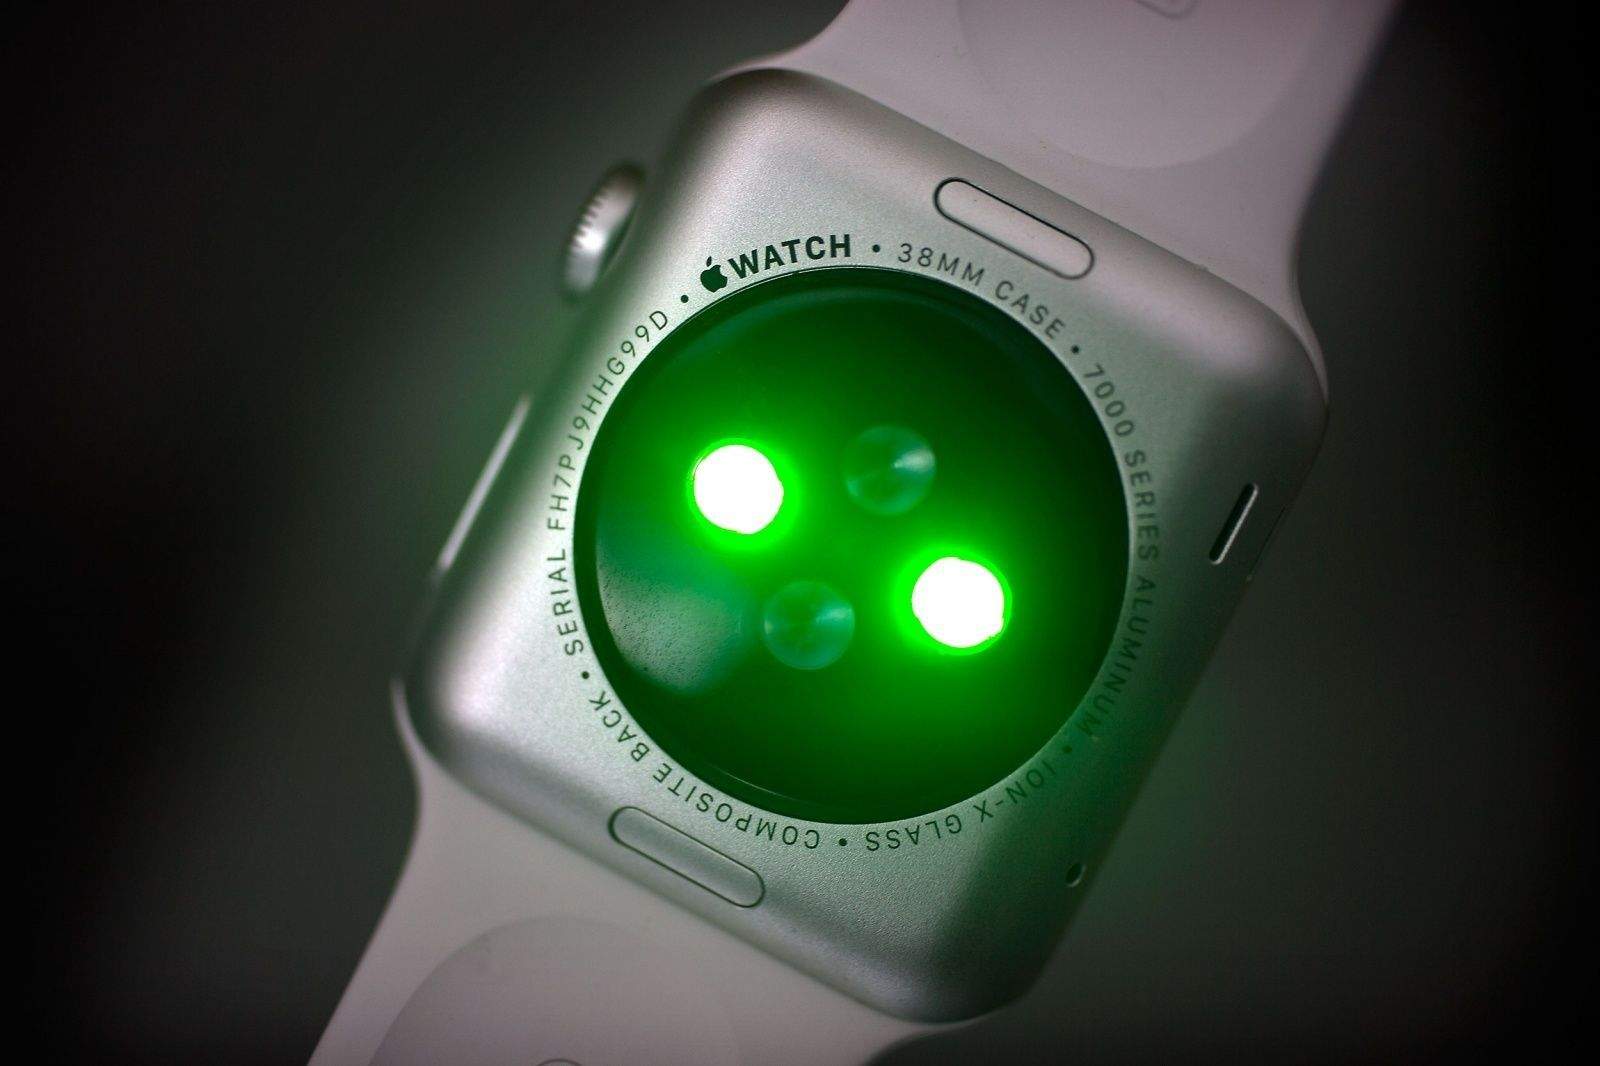 The heart rate sensor has green and infrared LED modes